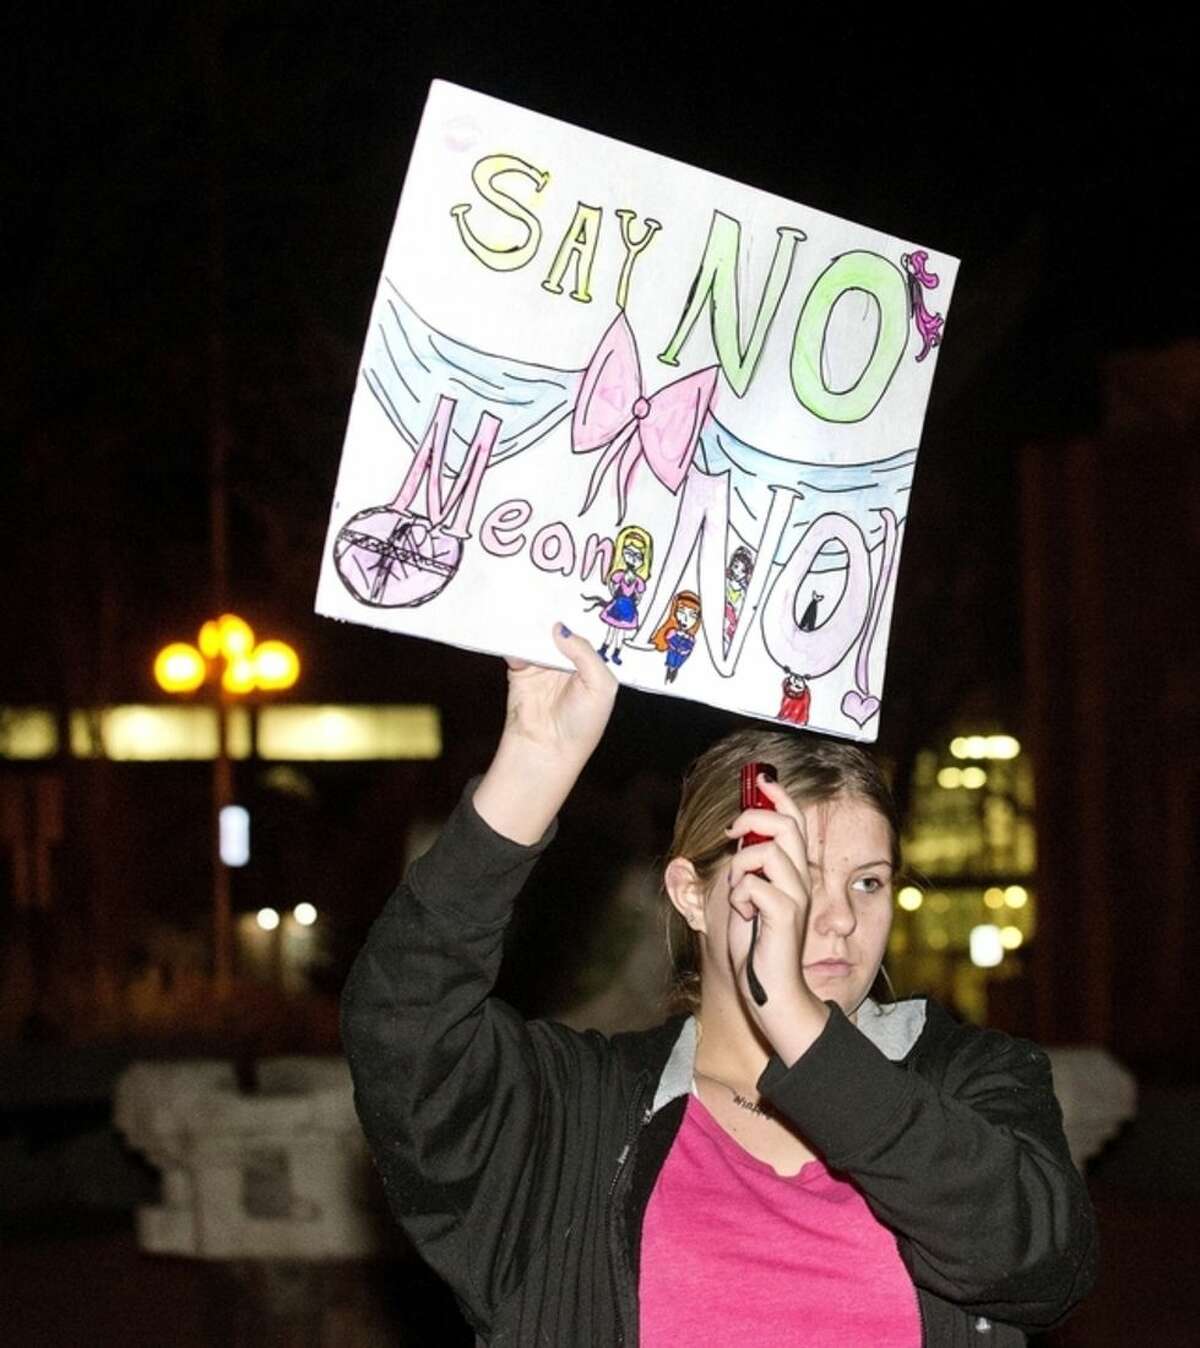 Rayla Riddick holds up a light to a sign during a protest of a Bill Cosby appearance in Pueblo, Colo., Friday, Jan. 16, 2015. A group of about 25 people gathered before the show to protest with signs and chants. (AP Photo/The Pueblo Chieftain, Chris McLean)